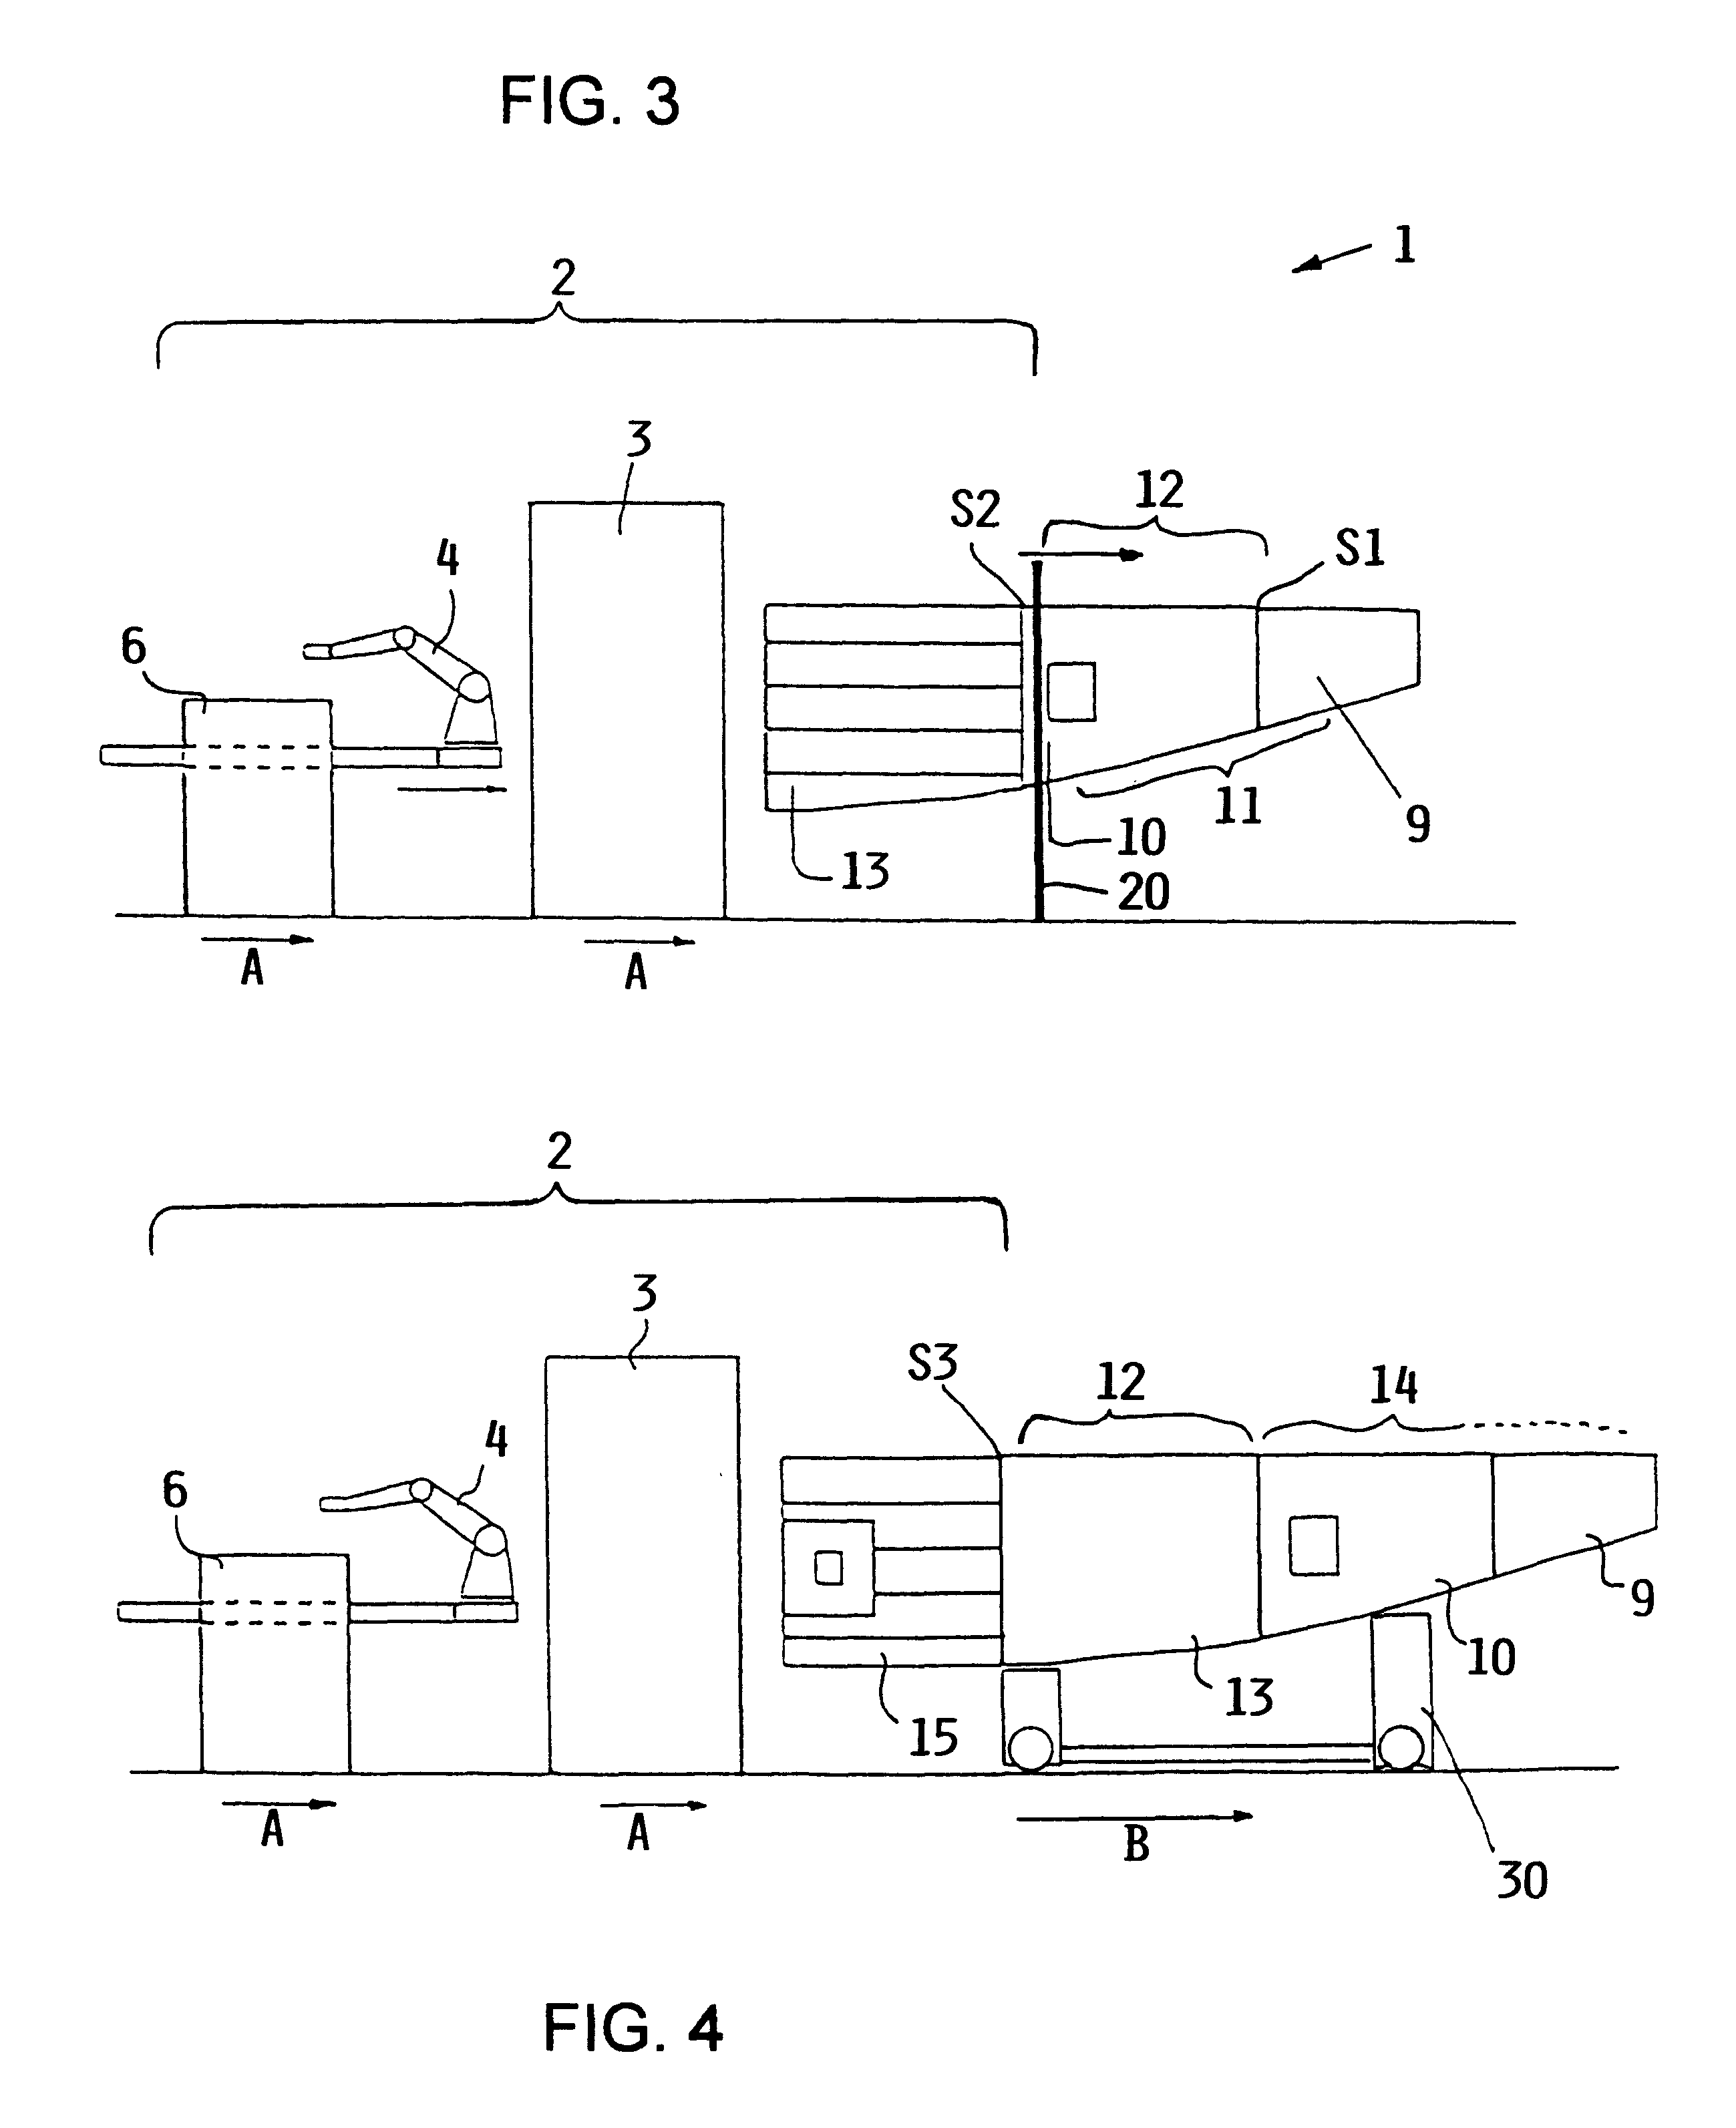 Method and system for fabricating, equipping and outfitting an aircraft fuselage